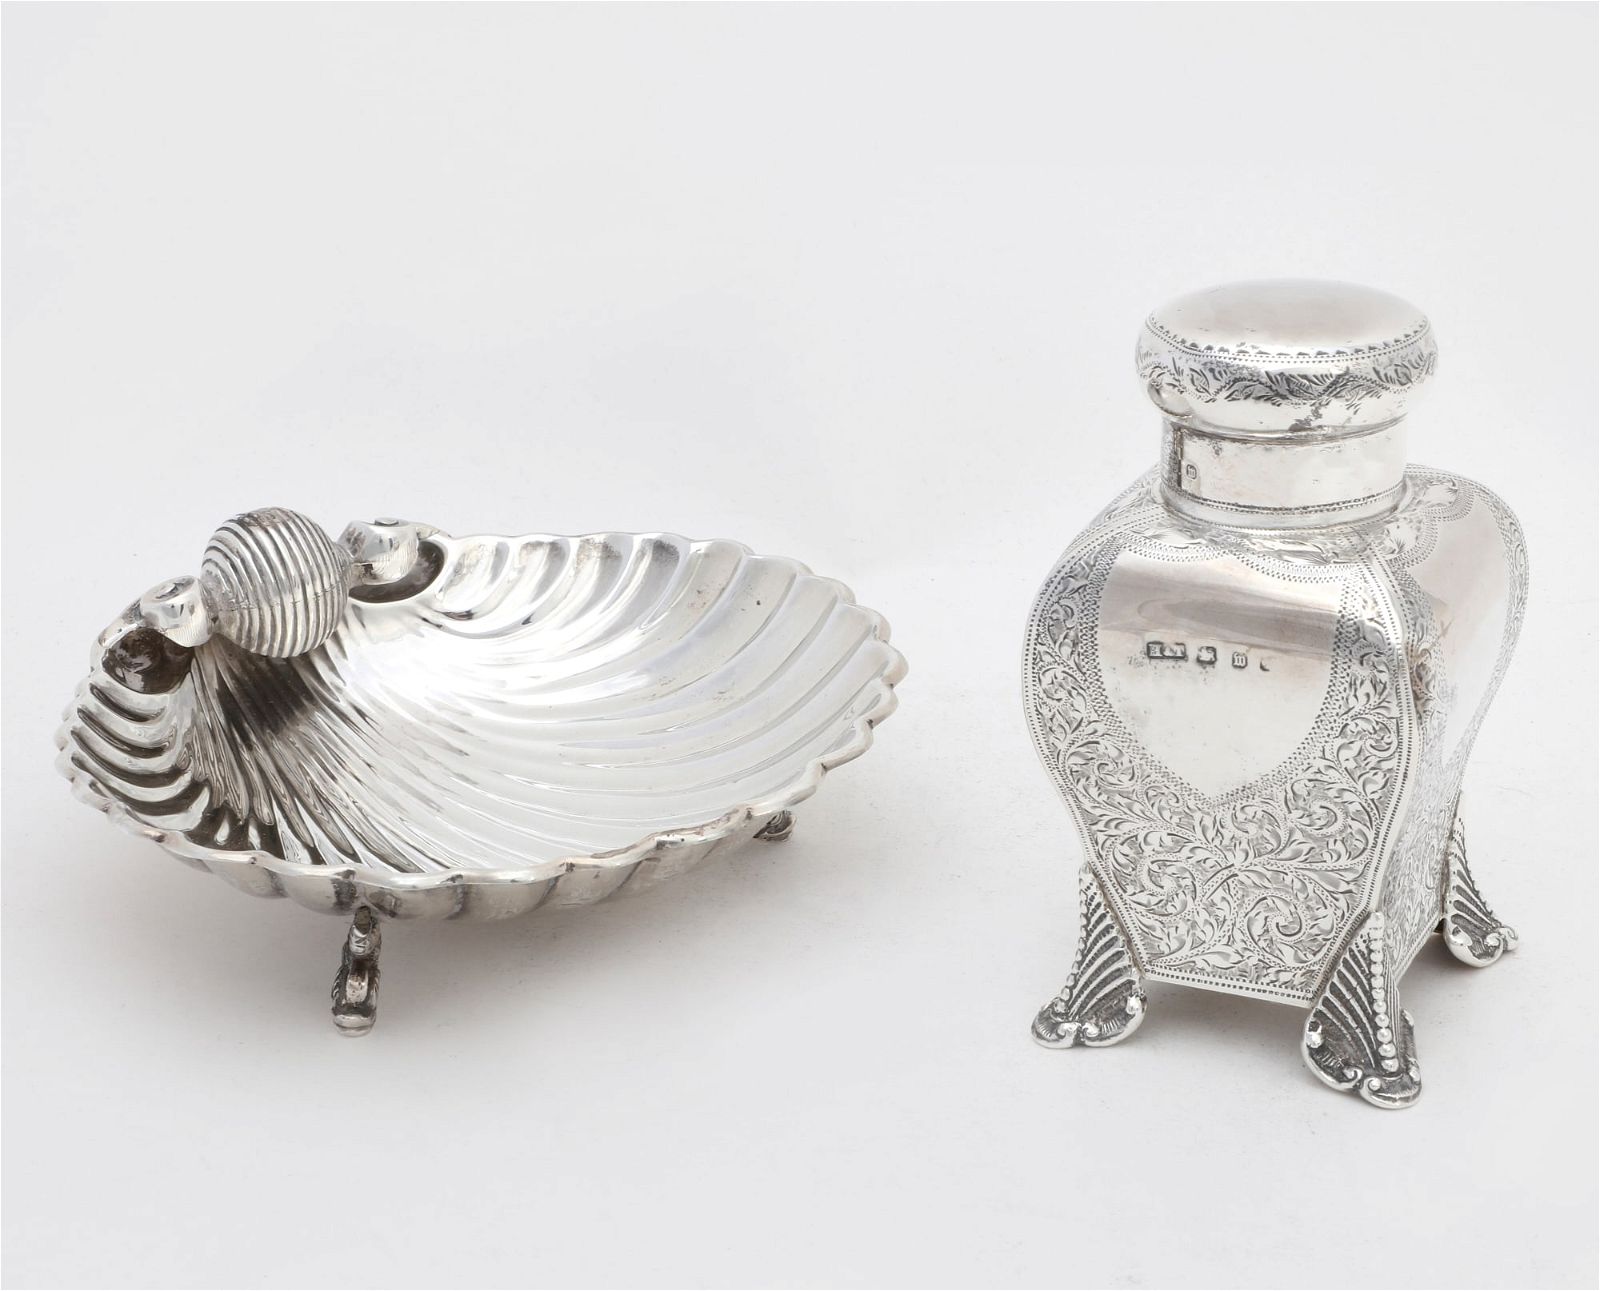 TWO STERLING SILVER TABLE DECORATIONSTwo 2fb32d7